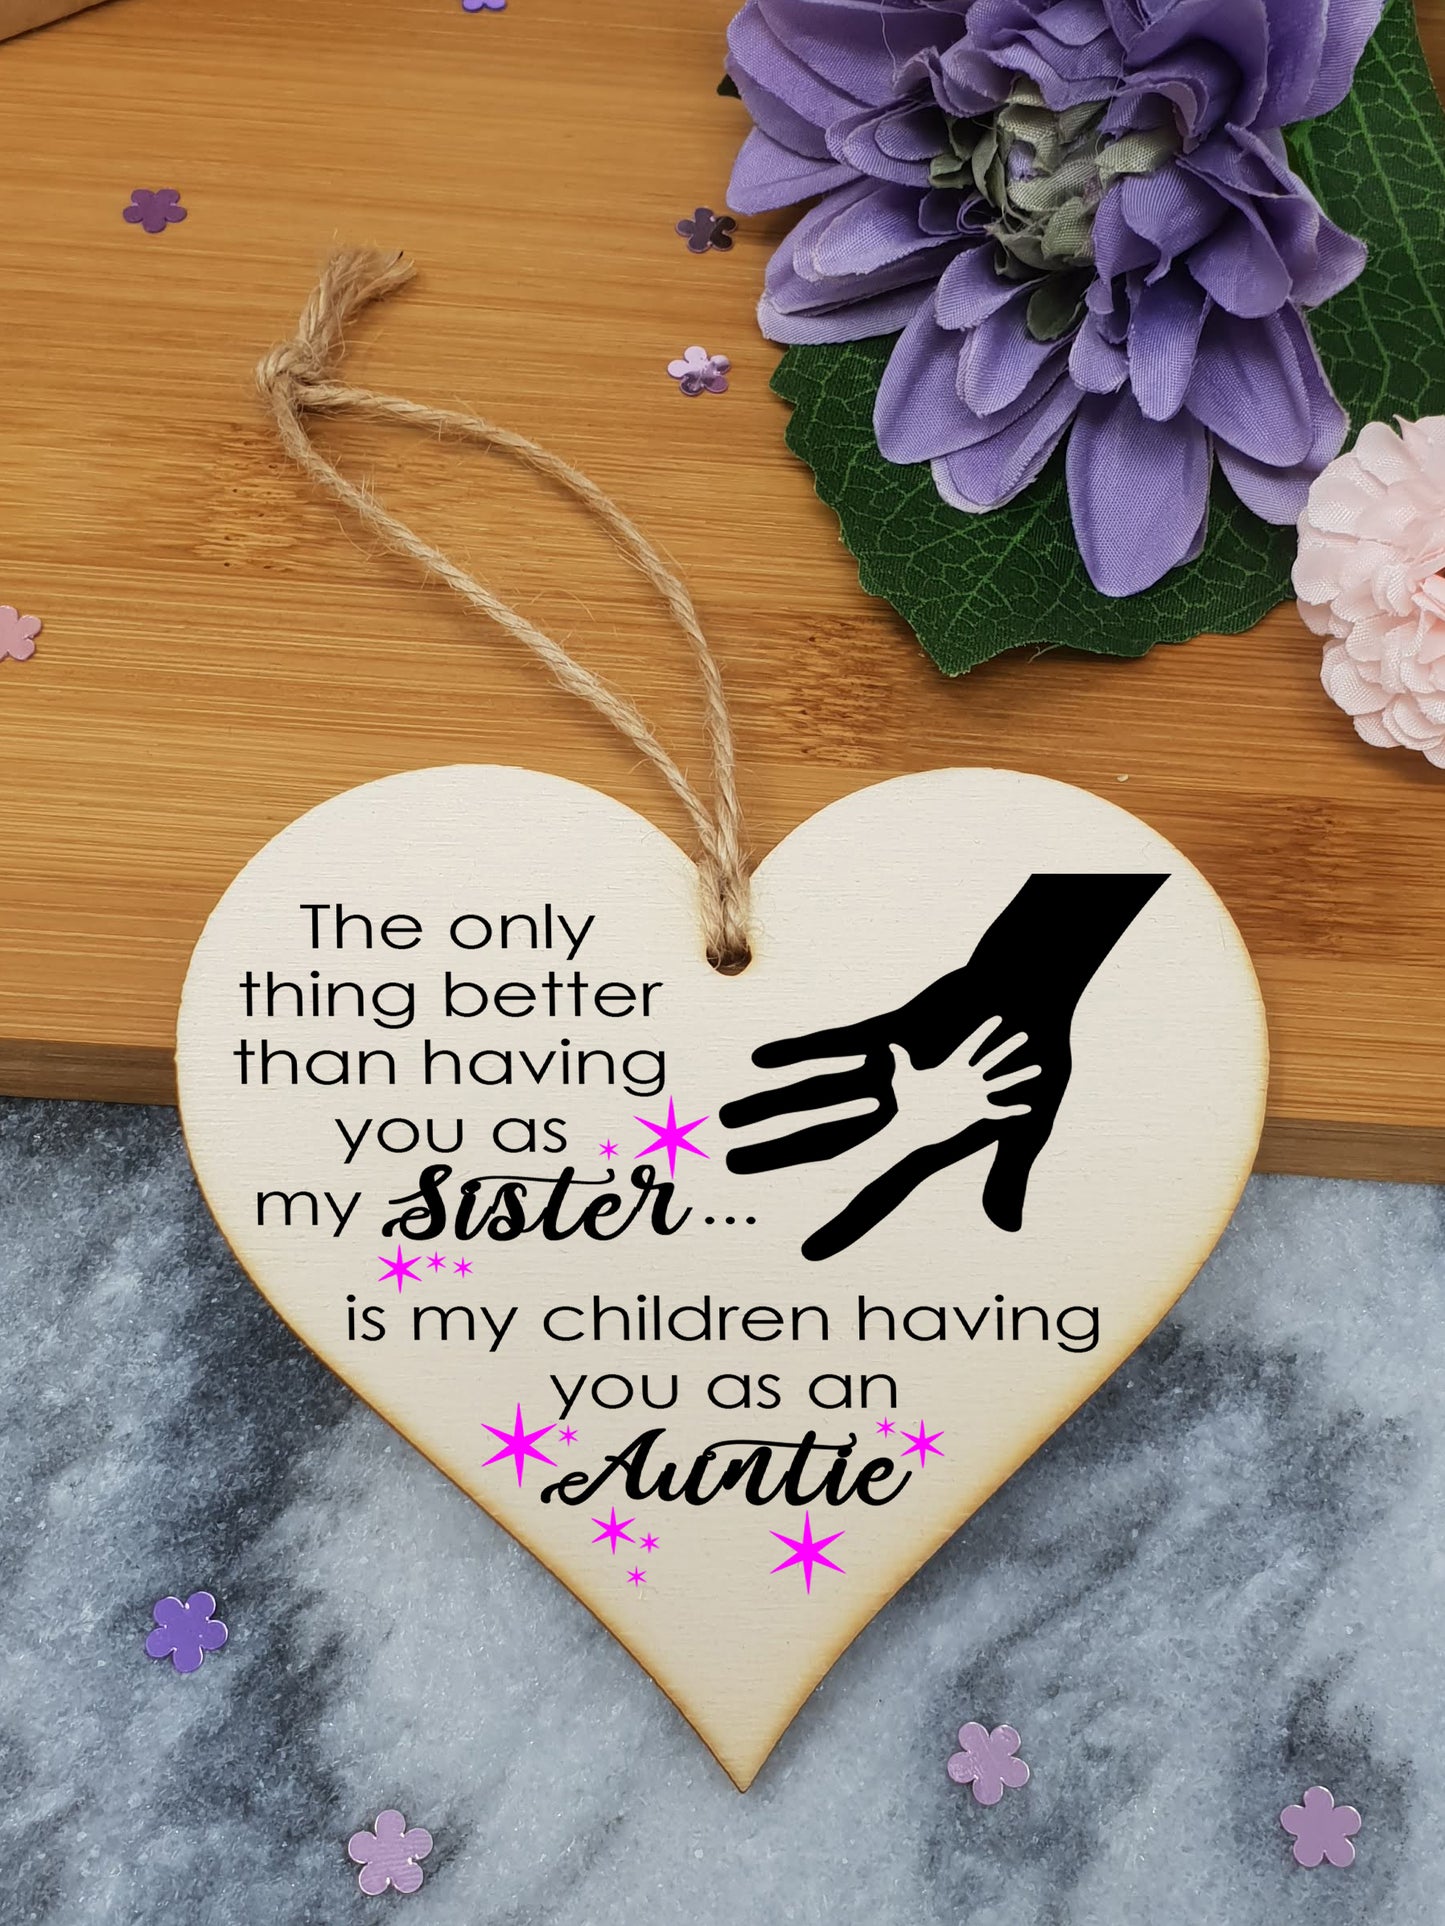 Handmade Wooden Hanging Heart Plaque Gift for Sister Auntie Loving Thoughtful Thank You Keepsake